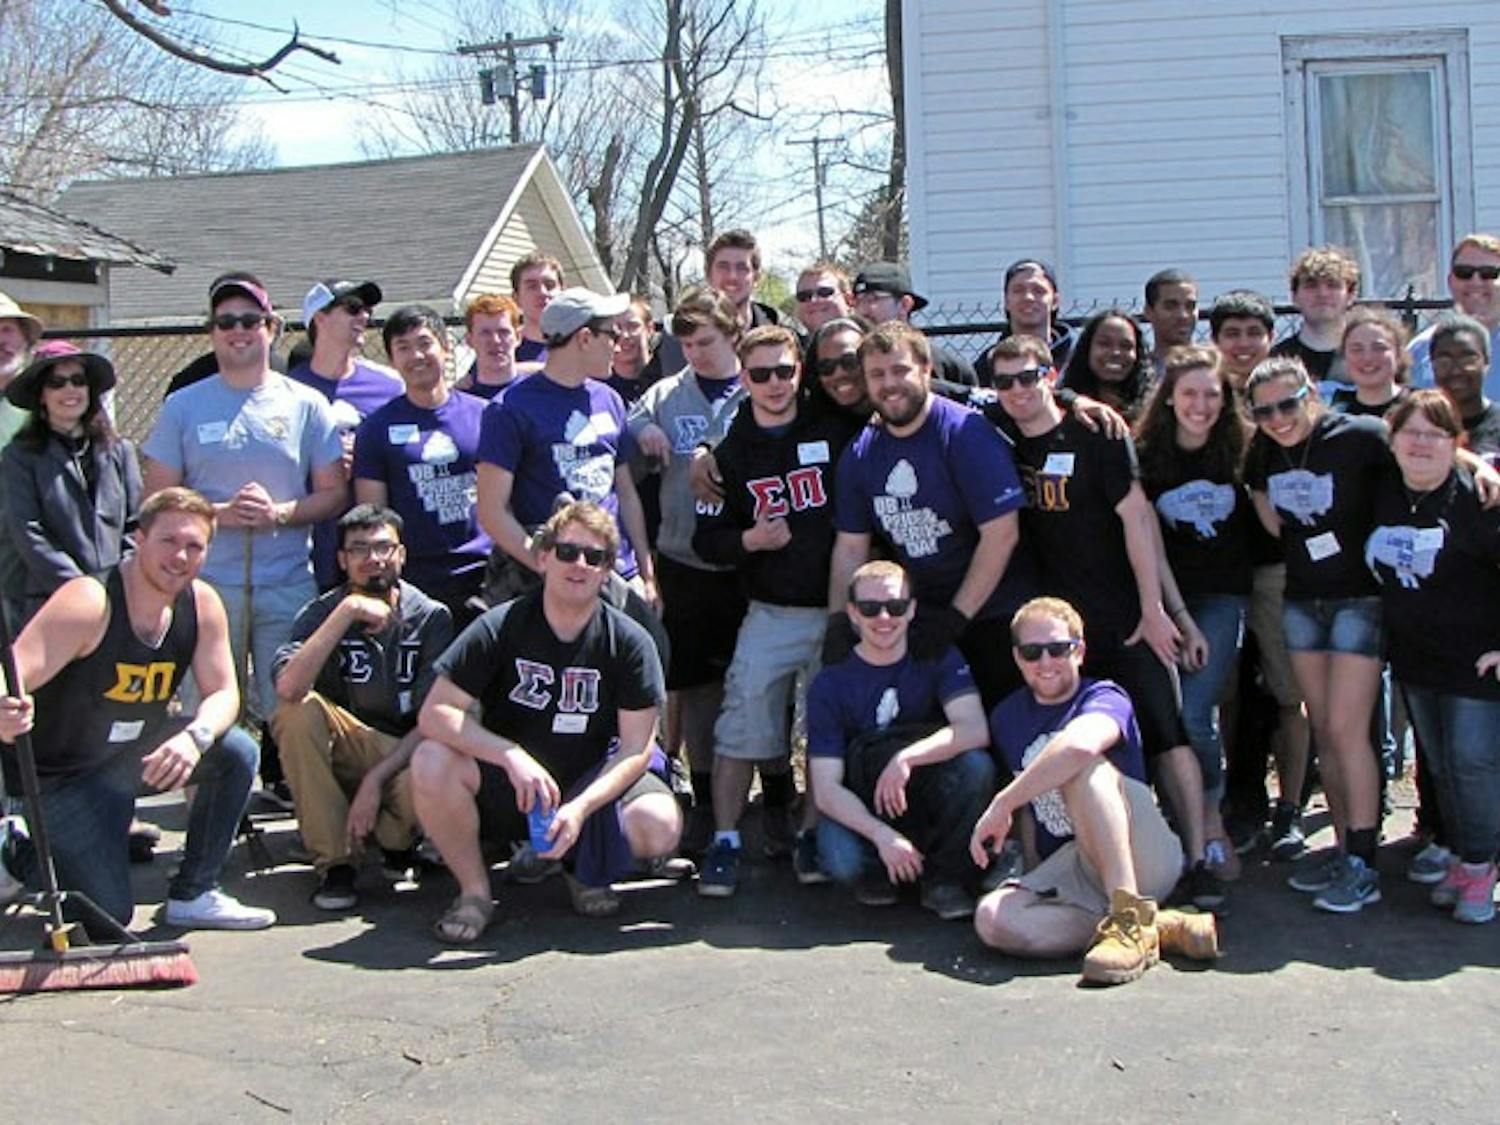 UB Students, University Heights Arts Association members, St. Andrew's Episcopal Church Staff and SUNY Buffalo State students volunteered at St. Andrews Church for UB Pride and Service Day. 